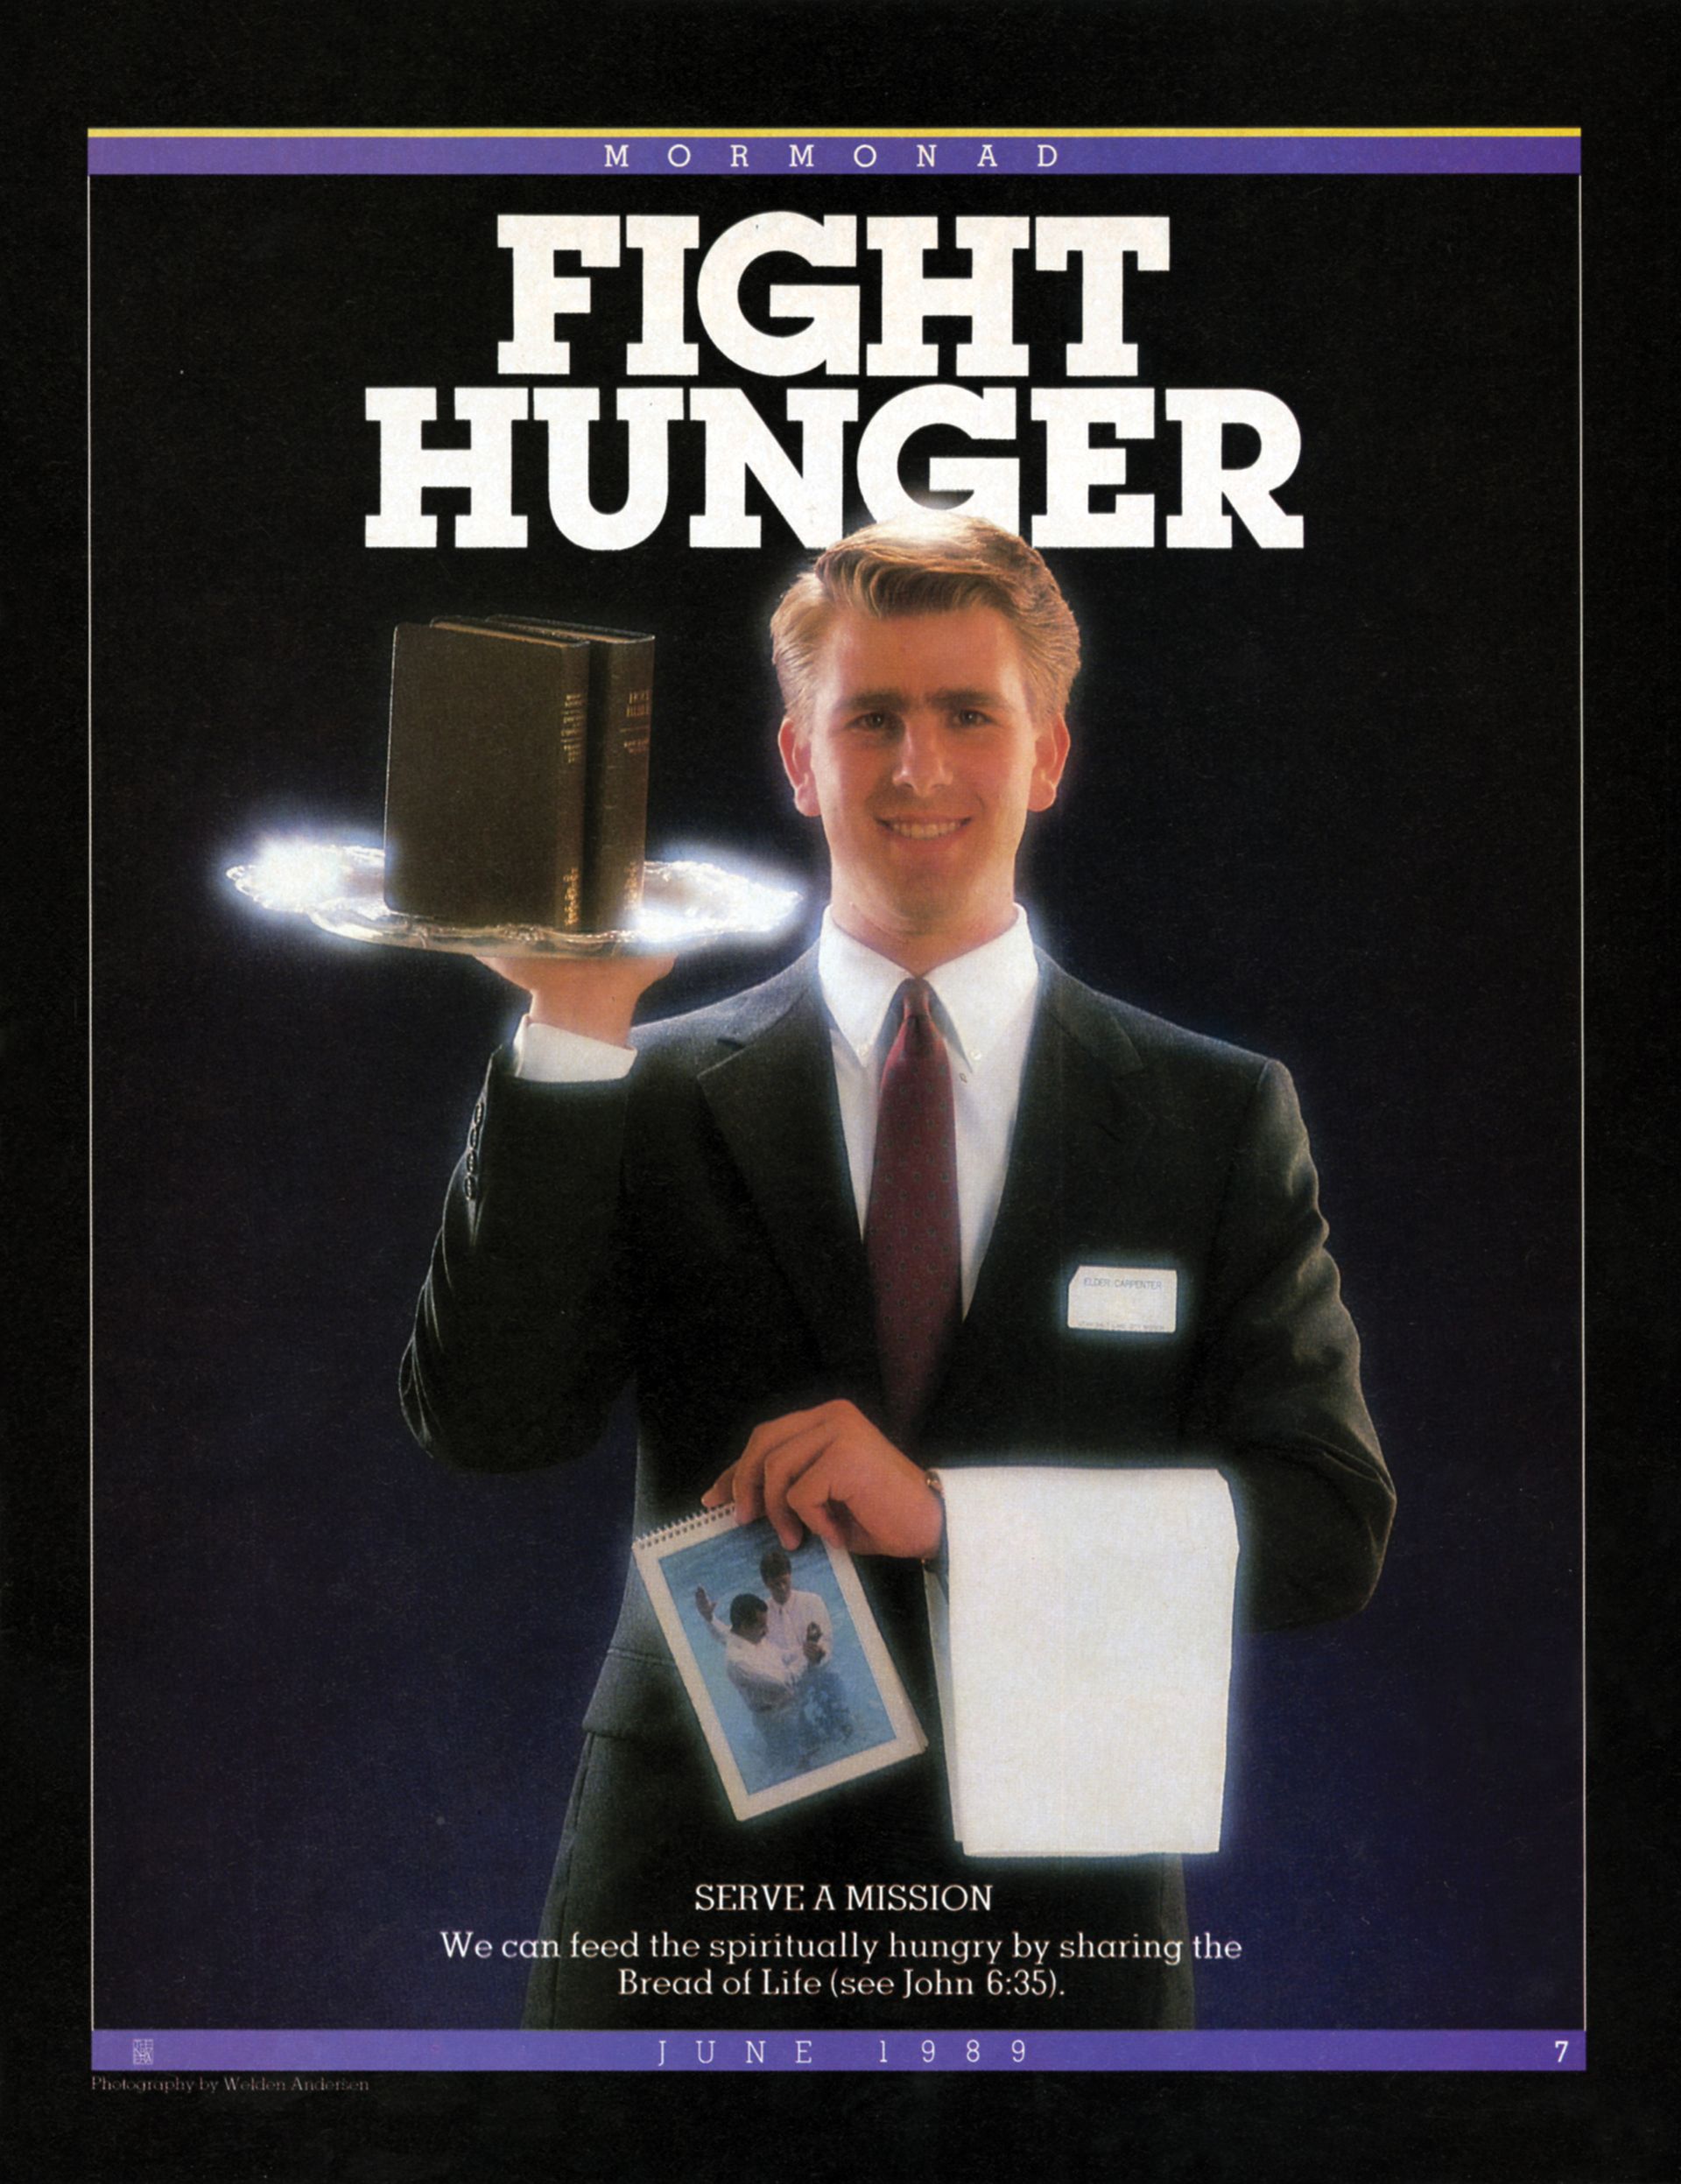 Fight Hunger. Serve a mission. We can feed the spiritually hungry by sharing the Bread of Life (see John 6:35). June 1989 © undefined ipCode 1.